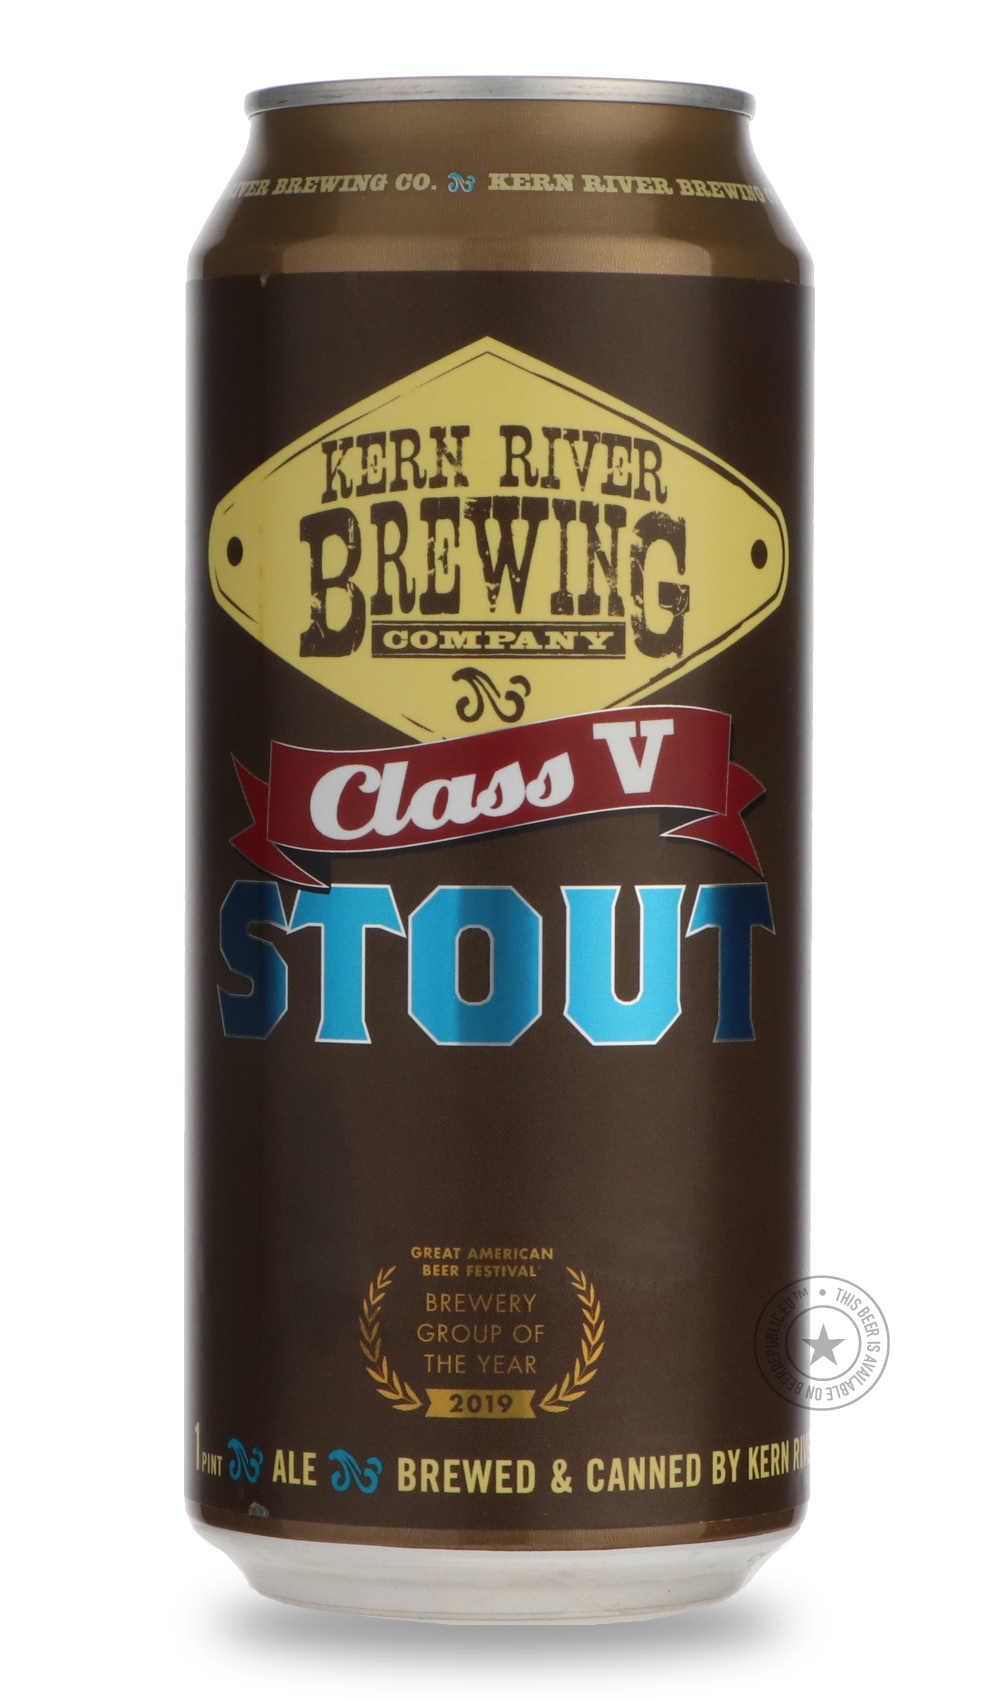 -Kern River- Class V-Stout & Porter- Only @ Beer Republic - The best online beer store for American & Canadian craft beer - Buy beer online from the USA and Canada - Bier online kopen - Amerikaans bier kopen - Craft beer store - Craft beer kopen - Amerikanisch bier kaufen - Bier online kaufen - Acheter biere online - IPA - Stout - Porter - New England IPA - Hazy IPA - Imperial Stout - Barrel Aged - Barrel Aged Imperial Stout - Brown - Dark beer - Blond - Blonde - Pilsner - Lager - Wheat - Weizen - Amber - B